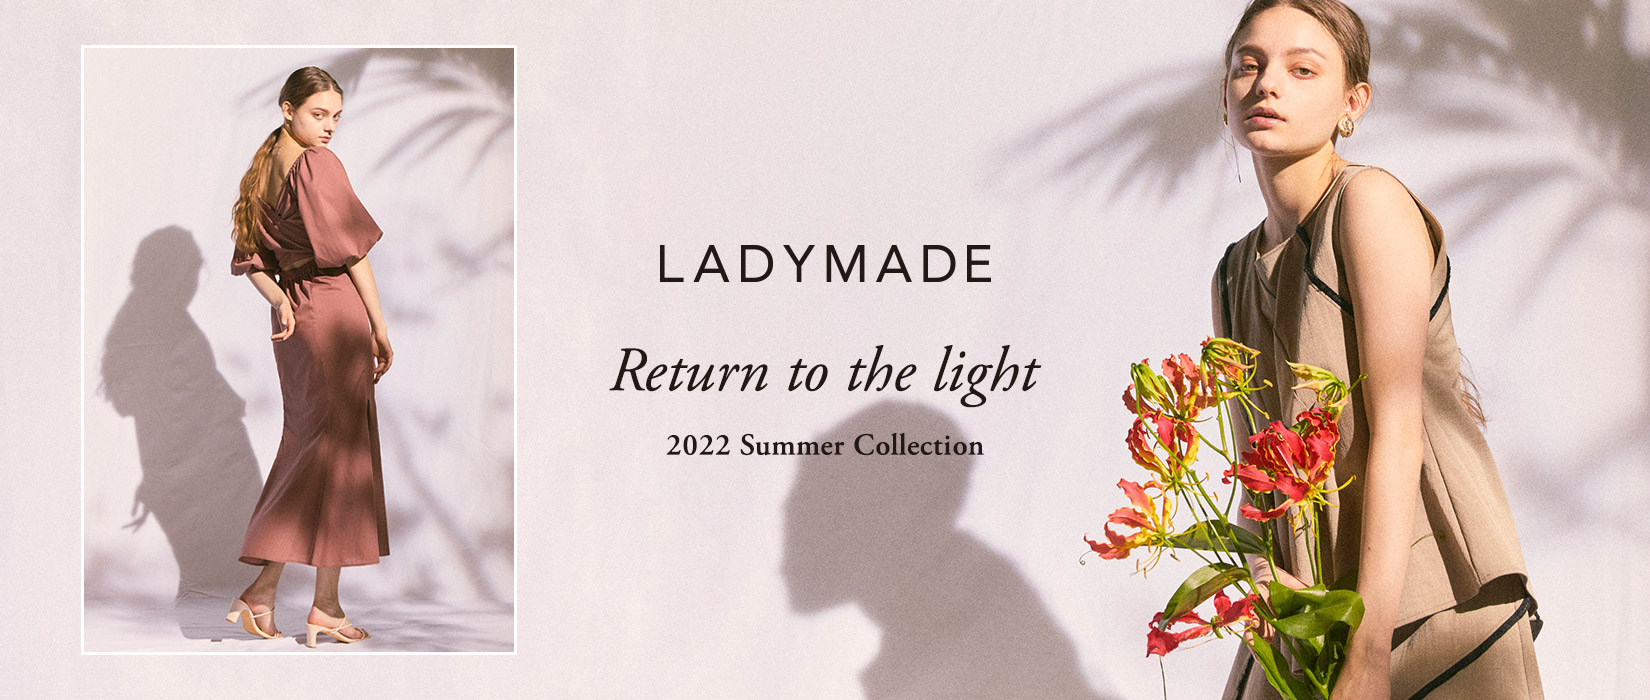 LADYAMADE - Return to the light-2022Summer Collection